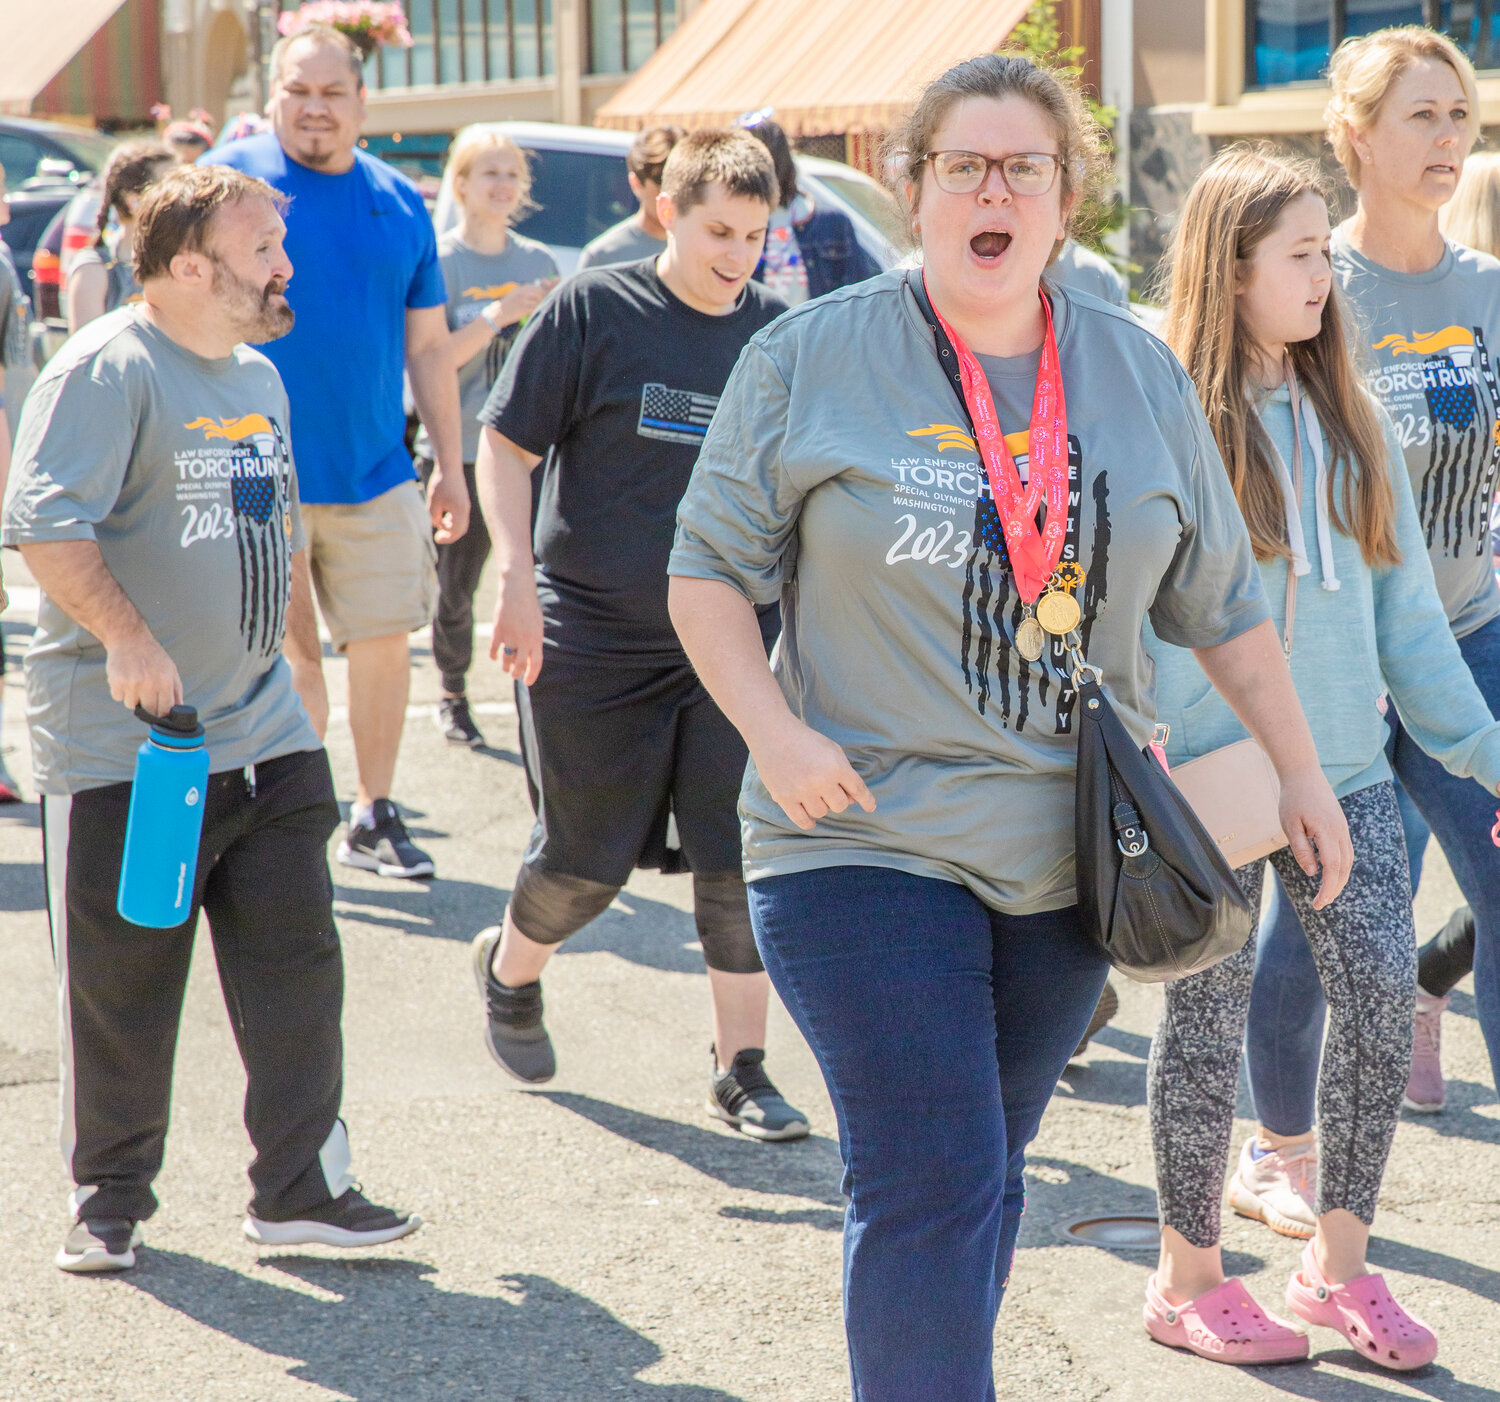 Participants cheer during the Lewis County Special Olympics Law Enforcement Torch Run in downtown Chehalis on Friday, June 2.